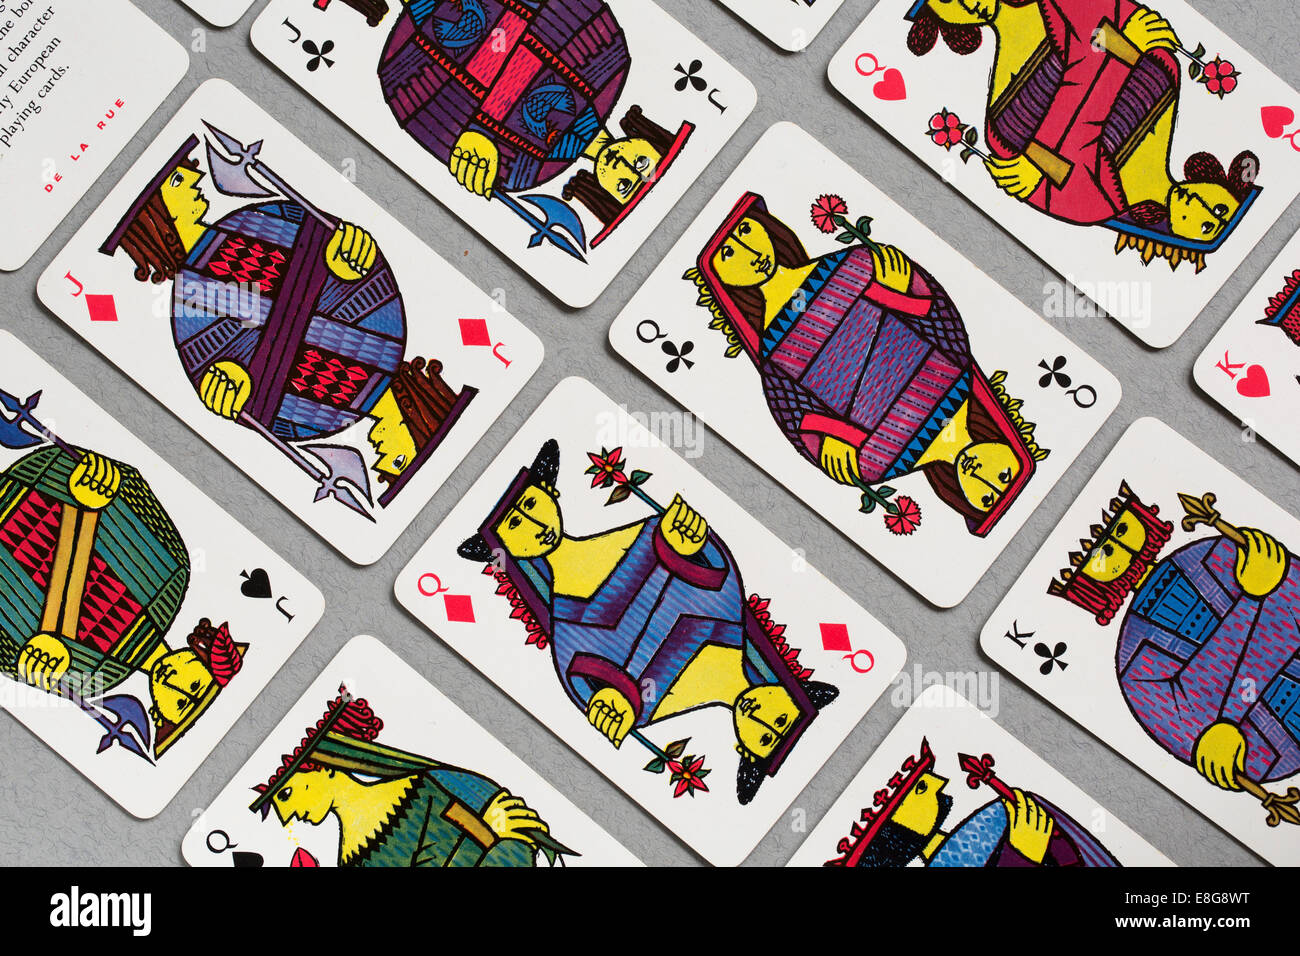 'Comedia' playing cards designed by Stig Lindberg Stock Photo